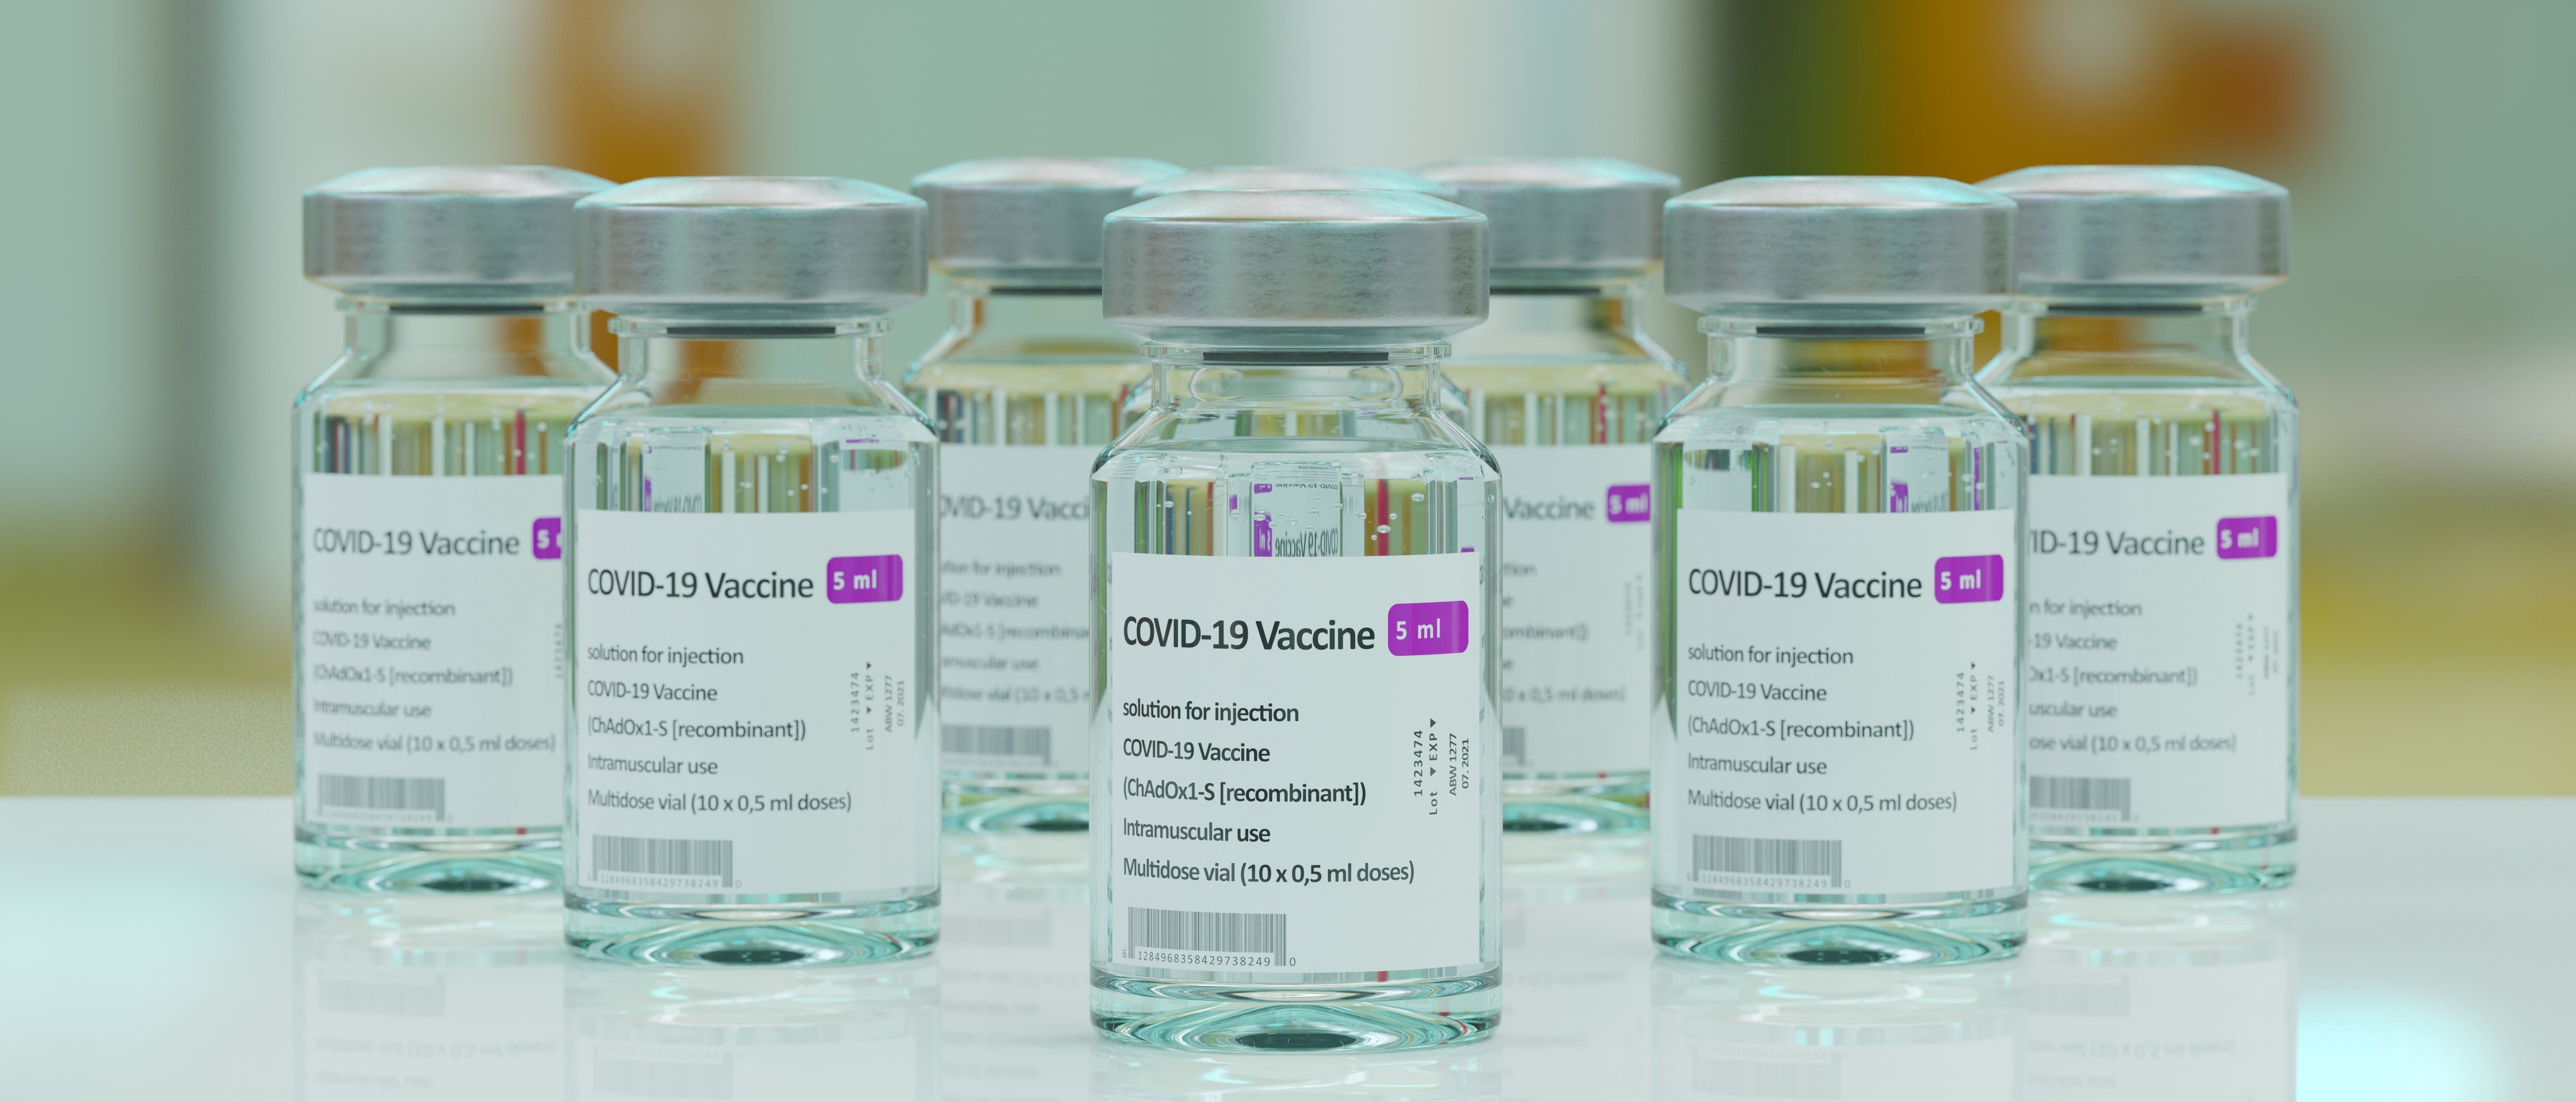 Several vials of Covid-19 vaccines / Photo by Braňo on Unsplash